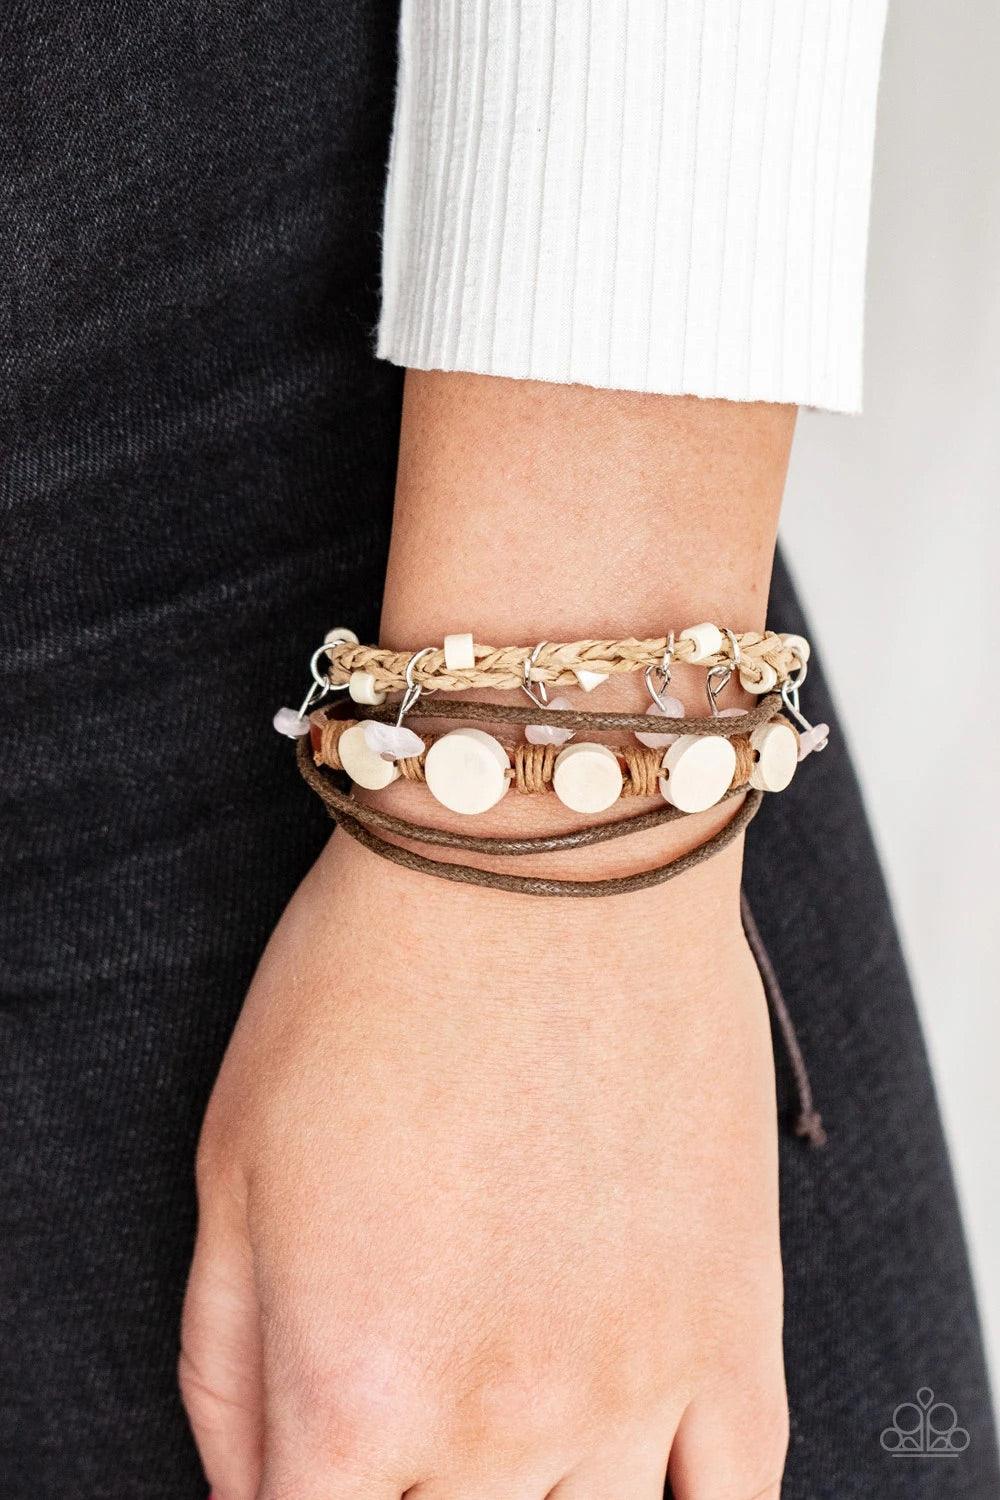 Paparazzi Accessories Run The Rapids - Pink Assorted strands of cording and leather, featuring flat wooden beads and small pink polished stones dangling from silver fittings, layer across the wrist for an earthy handcrafted style. Features an adjustable s